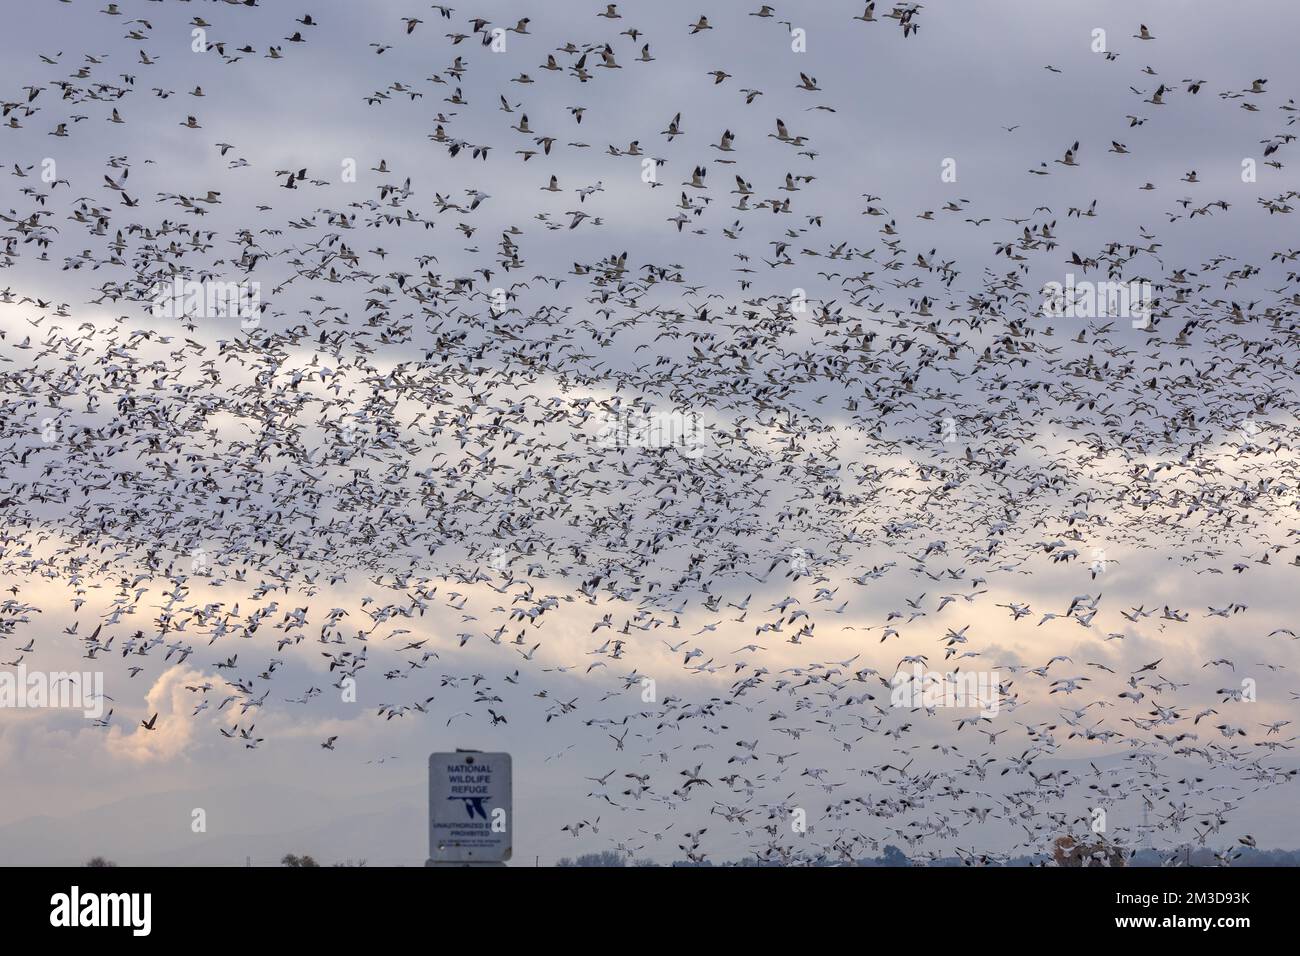 A massive flock of geese take flight at the San Joaquin National Wildlife refuge in the Central Valley of California USA Stock Photo